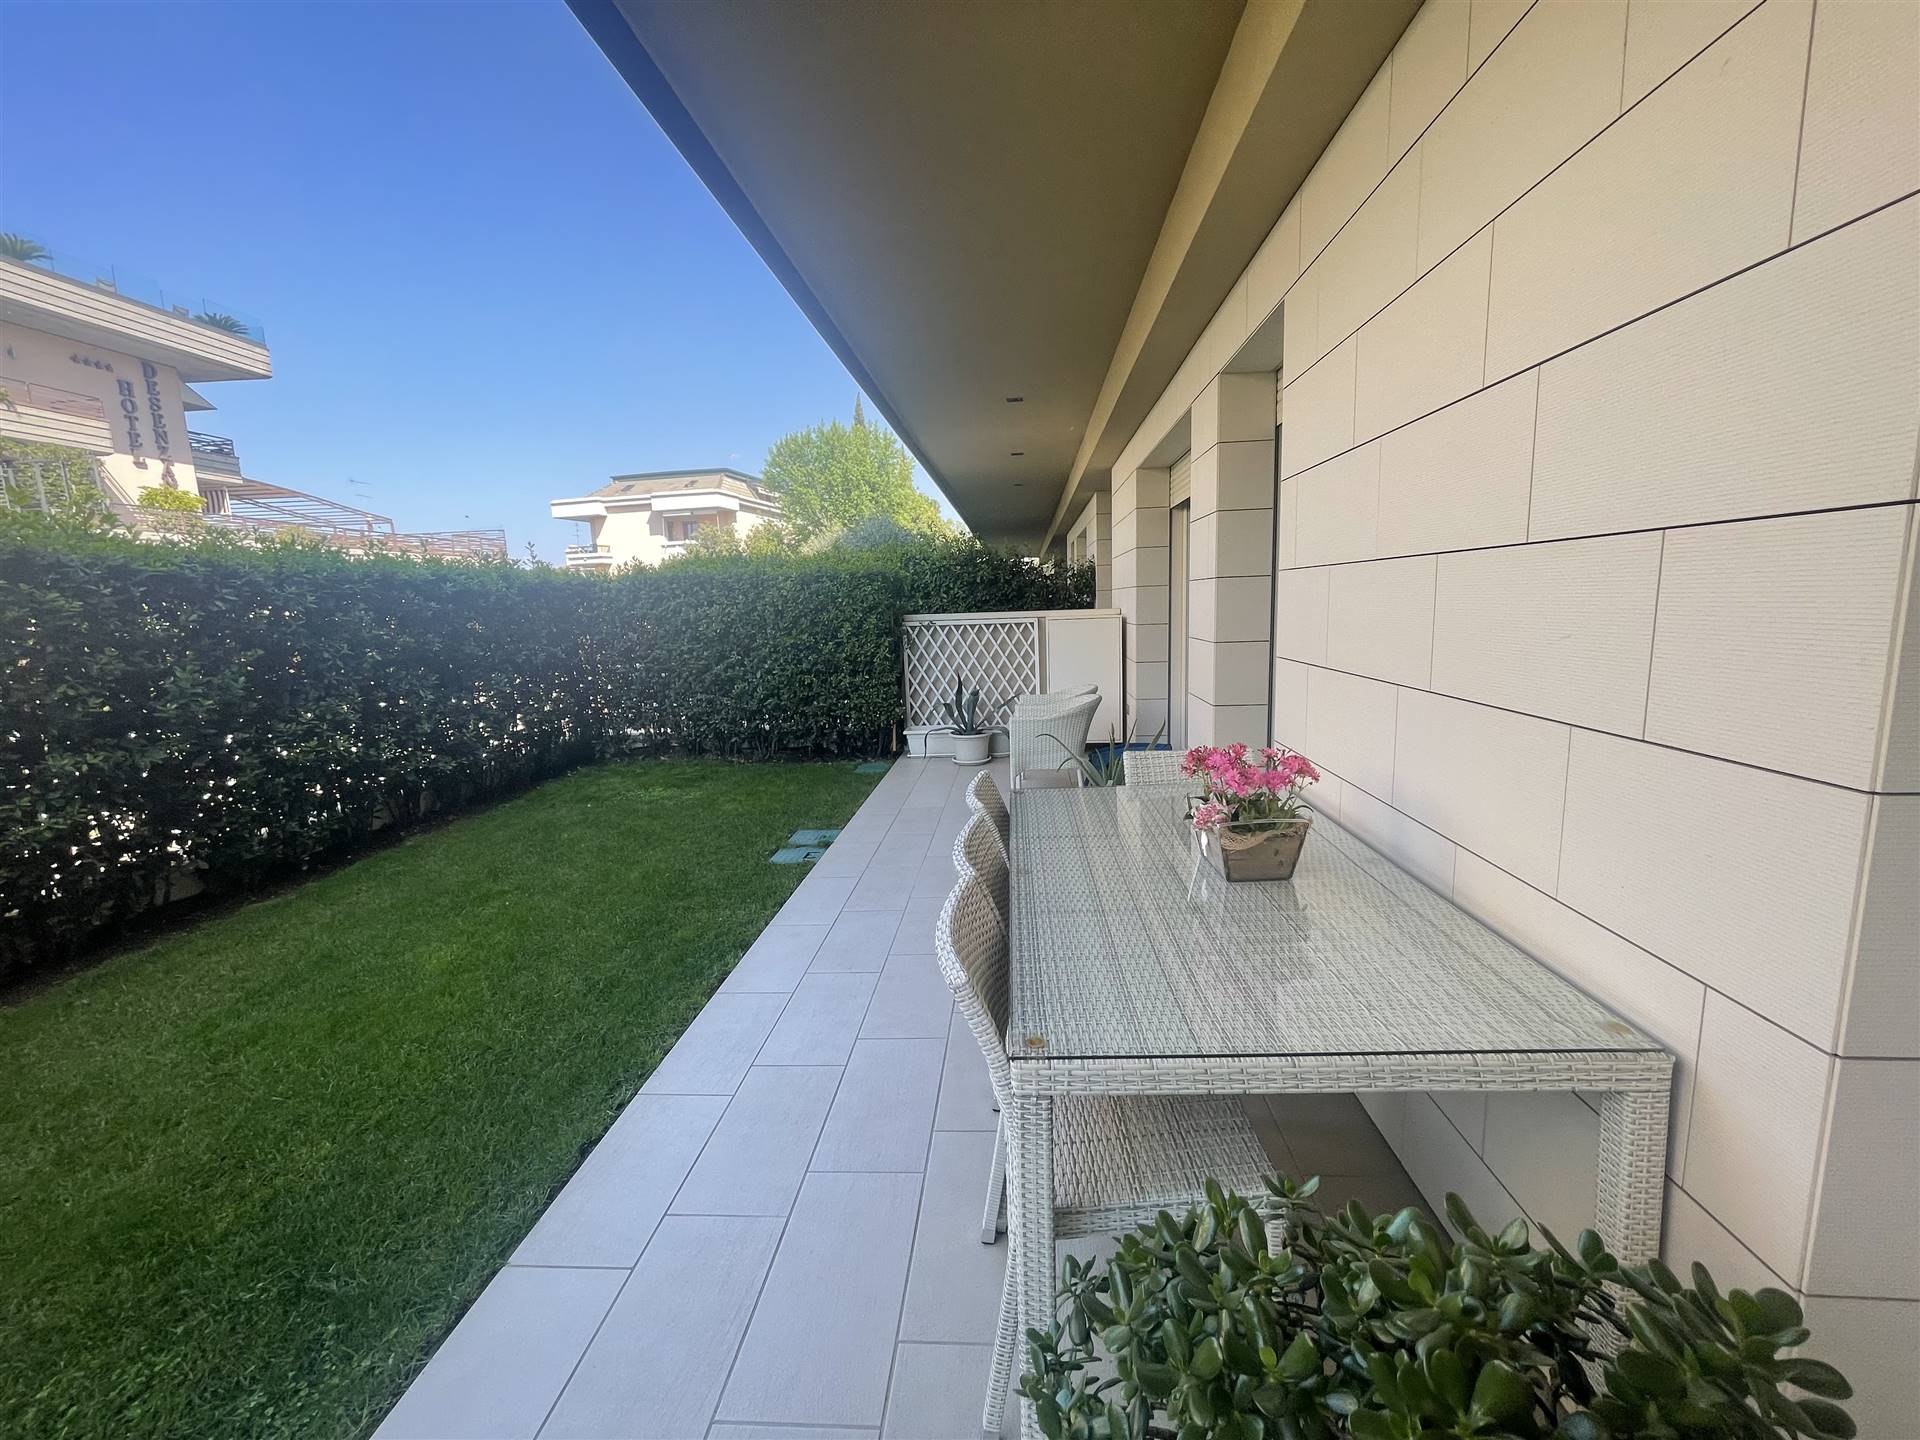 CENTRI: DESENZANO DEL GARDA, DESENZANO DEL GARDA, Apartment for sale of 90 Sq. mt., New construction, Heating To floor, Energetic class: B, Epi: 41,98 kwh/m2 year, placed at Ground on 1, composed by: 